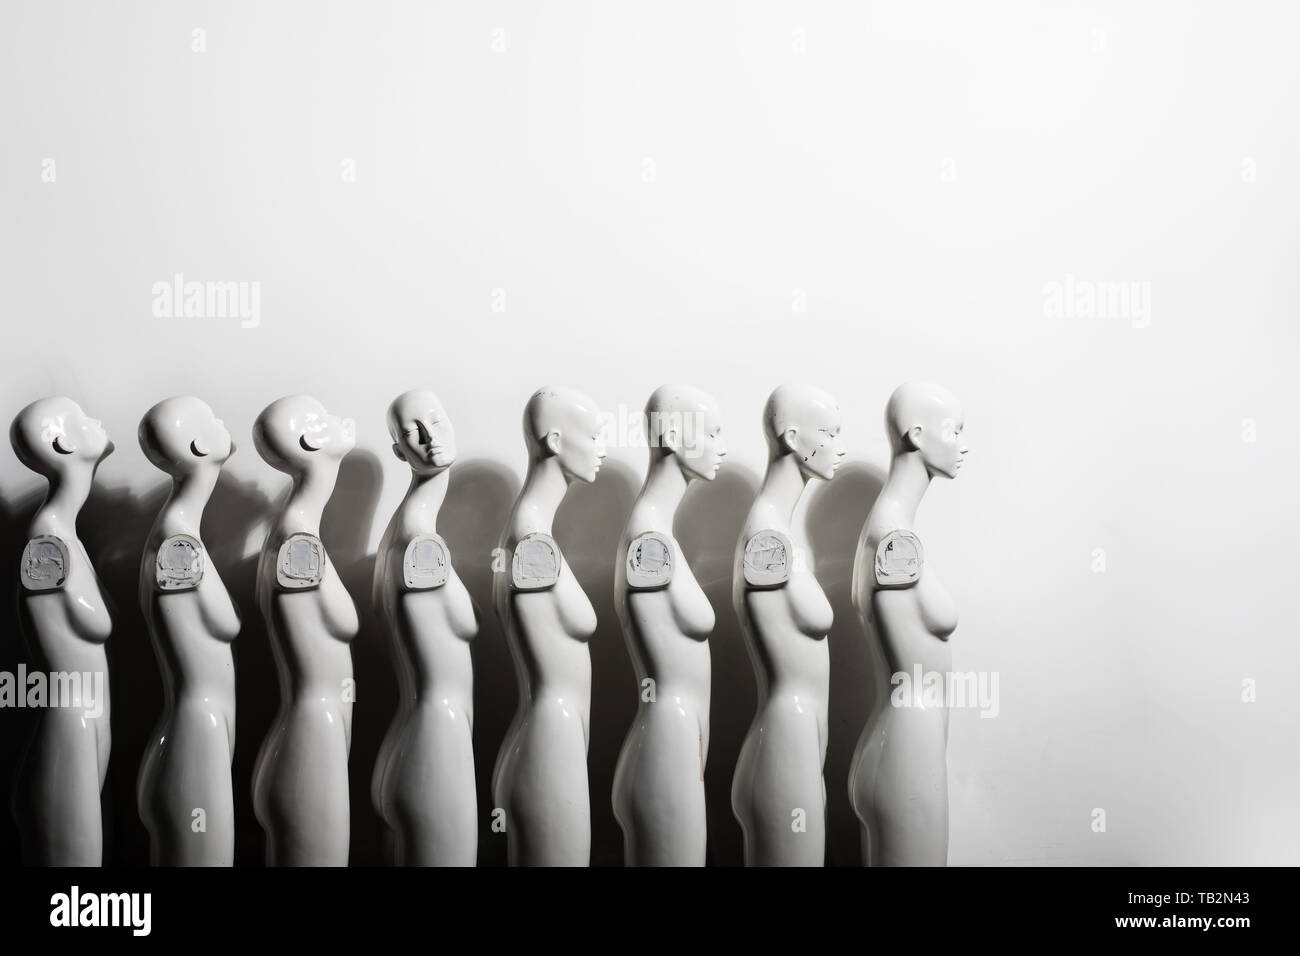 White Woman Torso Figurines Standing in The Line All Looking to Same Direction except of One, Shoot on White Background With Space for Text. Stock Photo